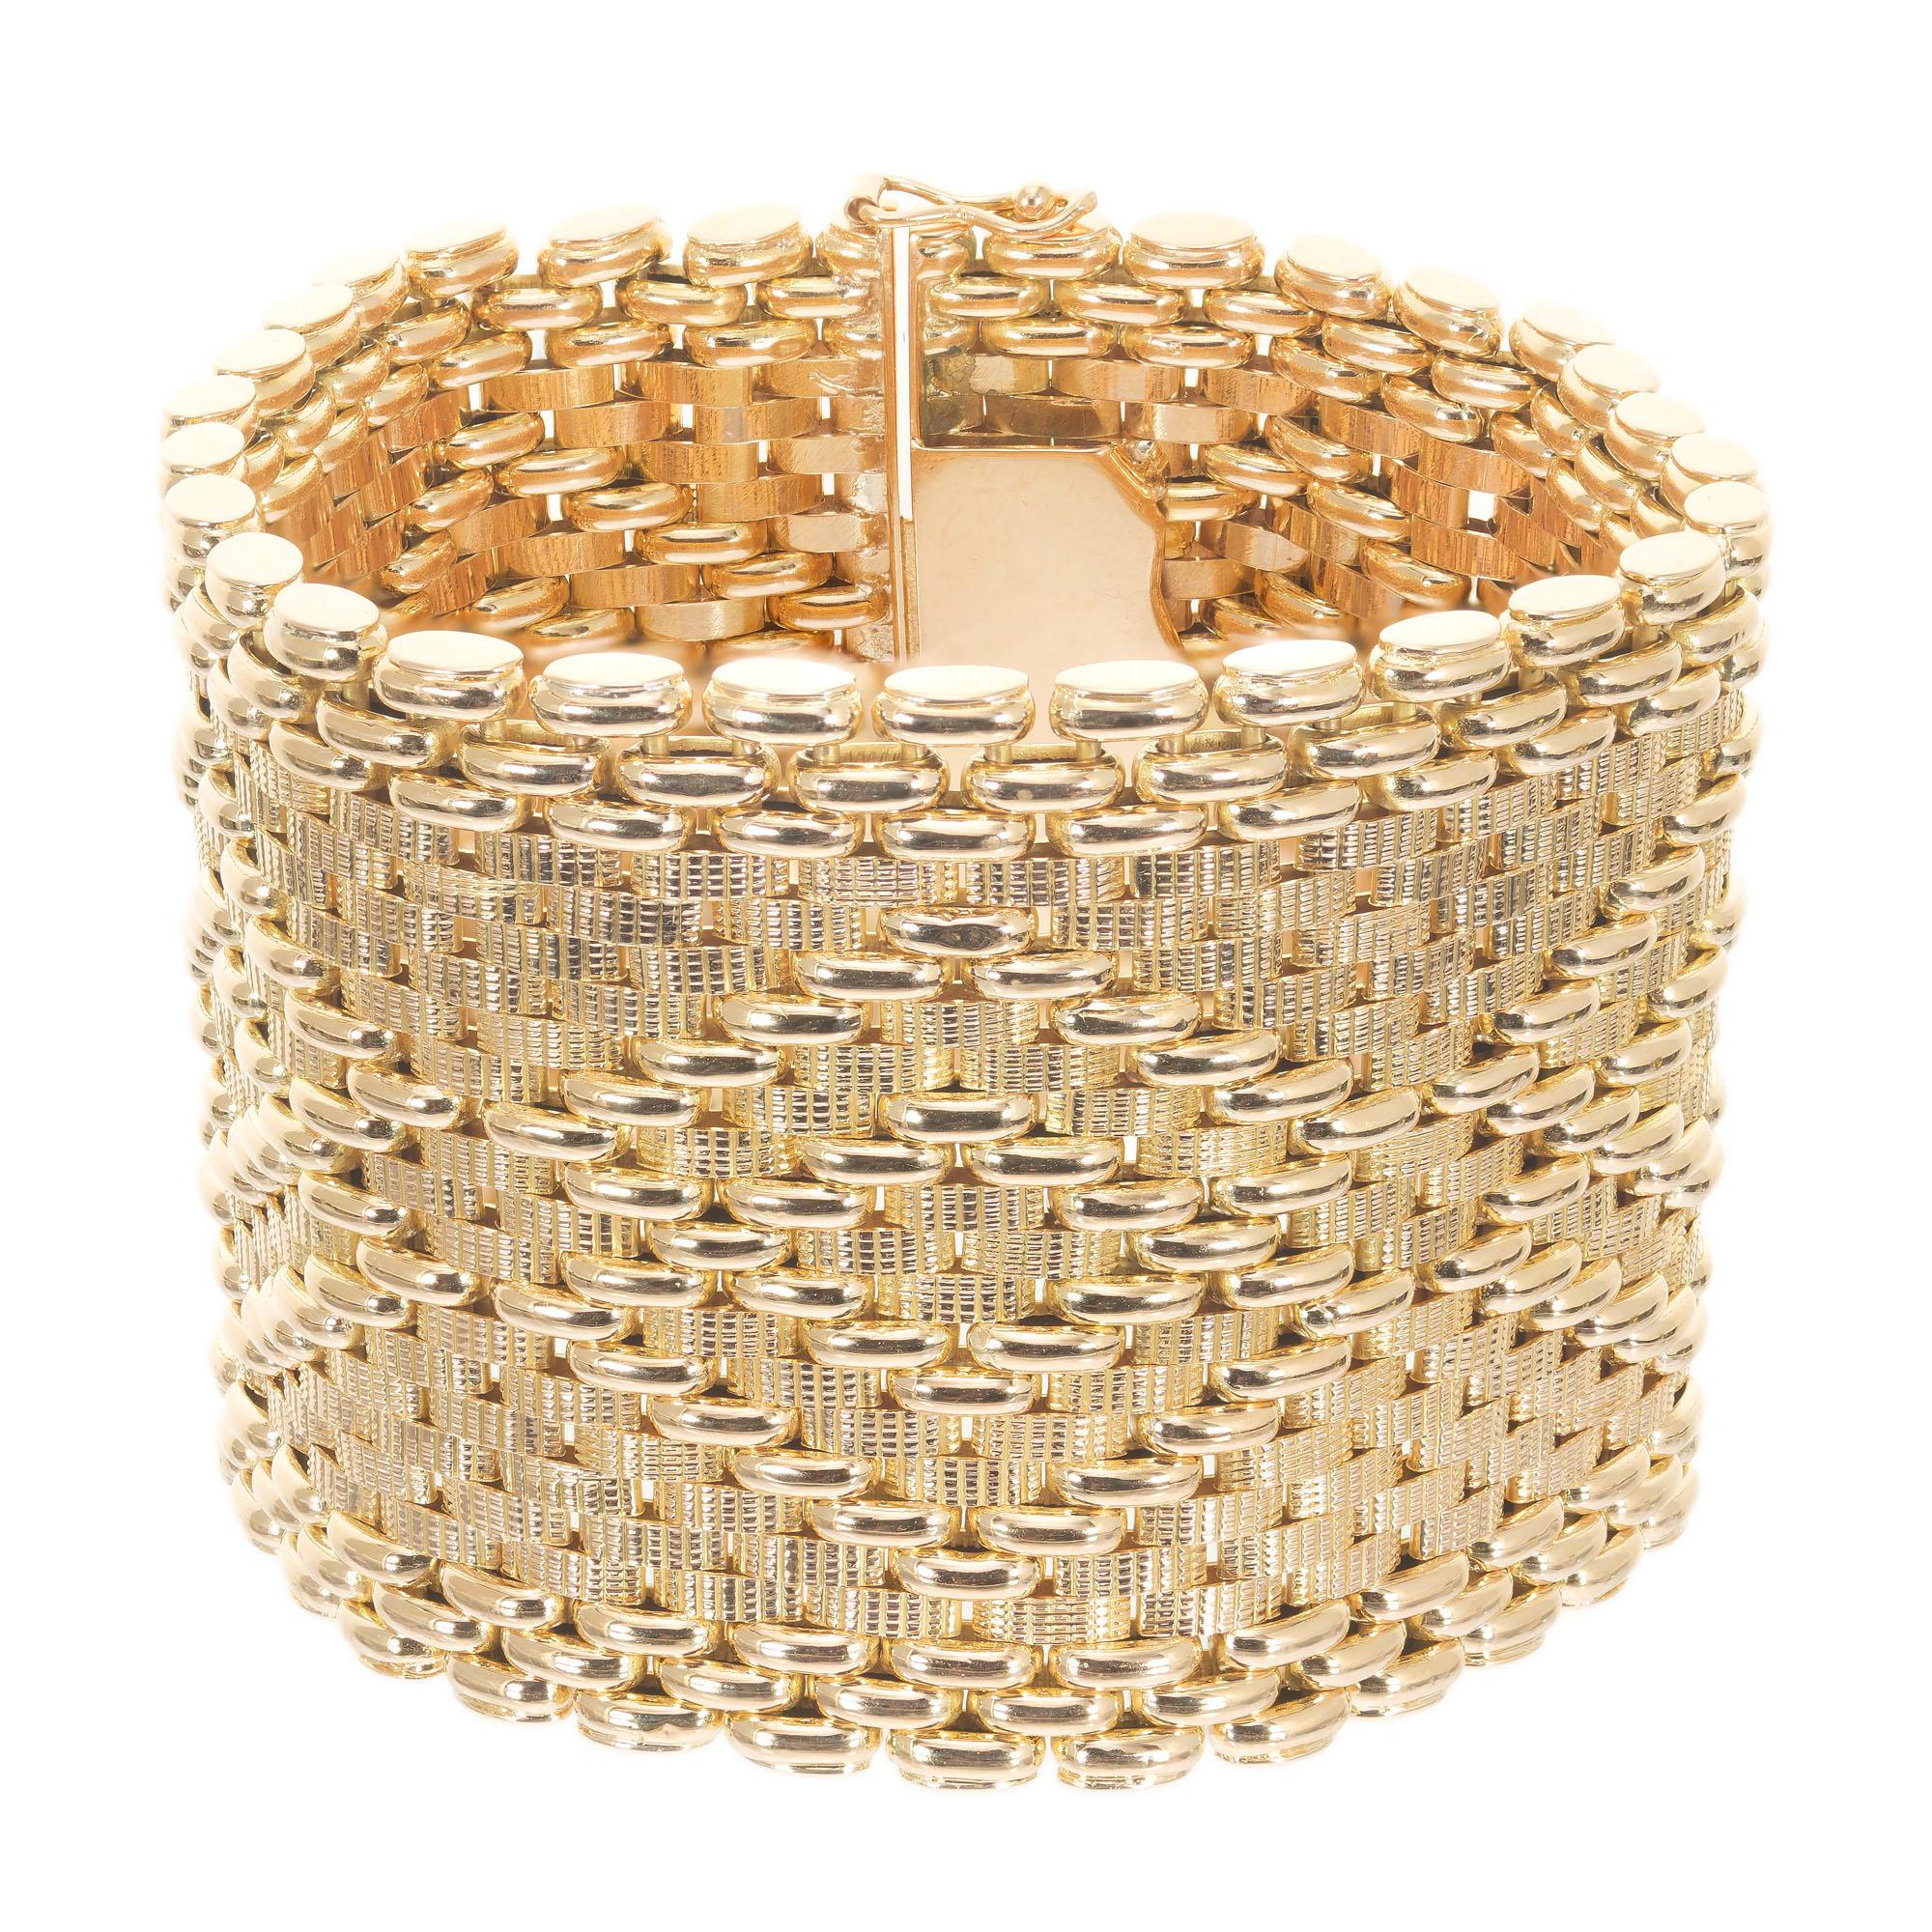 1.75 Inch wide 1970's 18k yellow gold mesh bracelet with a pattern of textured and high gloss links. Hidden built in catch and double side lock safety's. 7.5 inches in length.

18k yellow gold 
Stamped: 750 79-TO
93.2 grams
Bracelet: 7.5 Inch
Width: